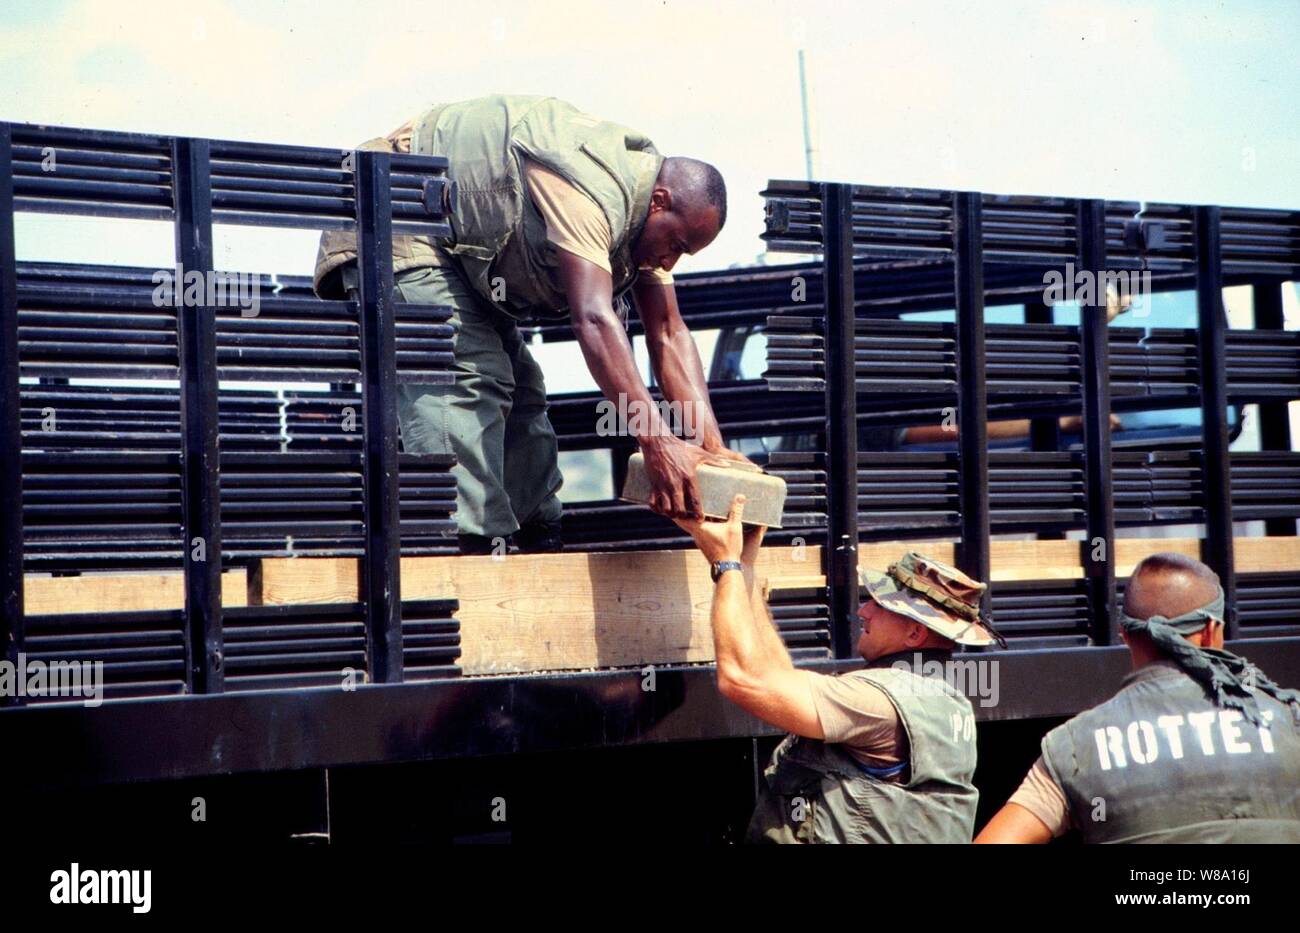 Marine Barracks Minefield Maintenance personnel unload deactivated anti-tank and anti-personnel land mines for destruction at a demolition site on Naval Station Guantanamo Bay, Cuba, in this March 18, 1997, file photo.  Anti-personnel and anti-tank land mines on the U.S. side of the fence separating Communist Cuba and the U.S. Naval Base at Guantanamo Bay are being removed in accordance with the Presidential Order of May 16, 1996.  Approximately 50,000 land mines were placed in the buffer zone between Communist Cuba and Guantanamo Bay beginning in 1961 as a result of the Cold War. The land min Stock Photo